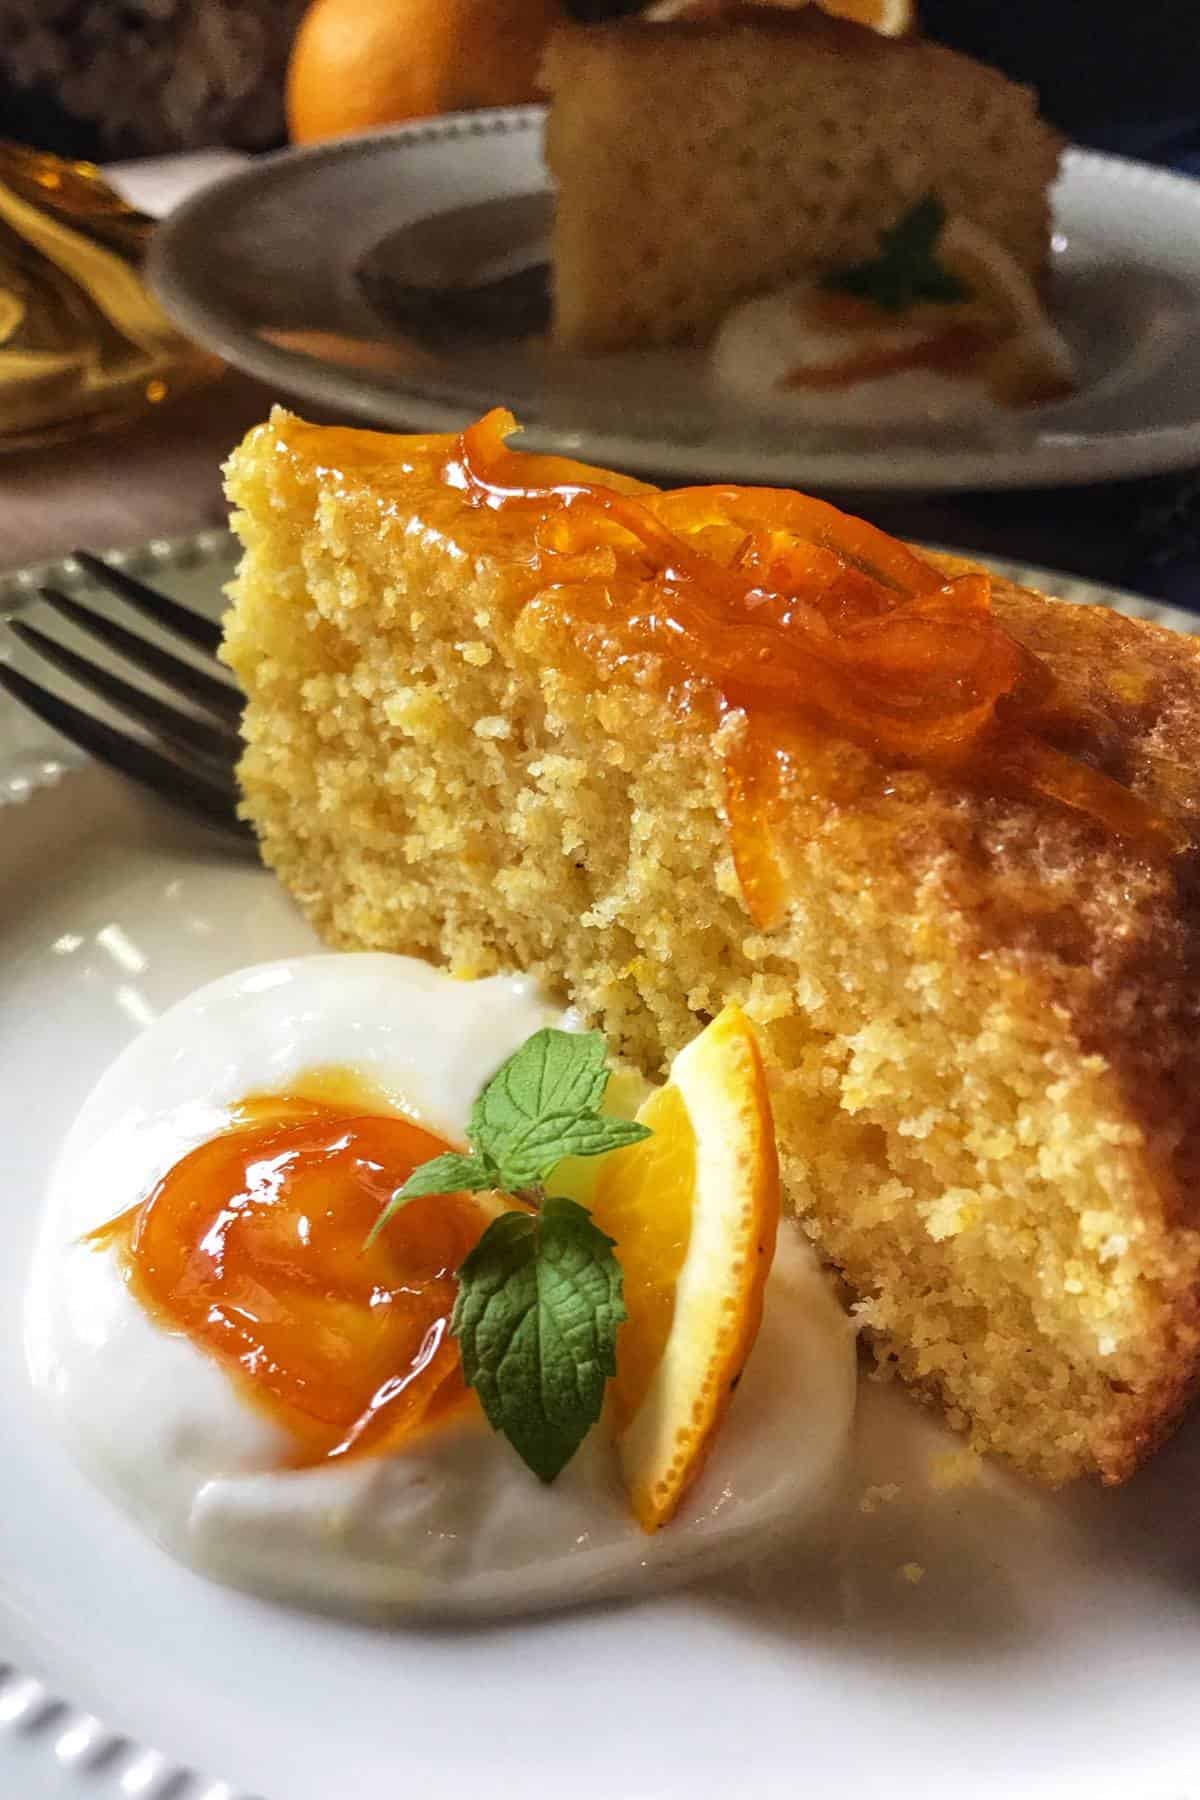 A slice of cake next to whipped ricotta, topped with orange syrup.